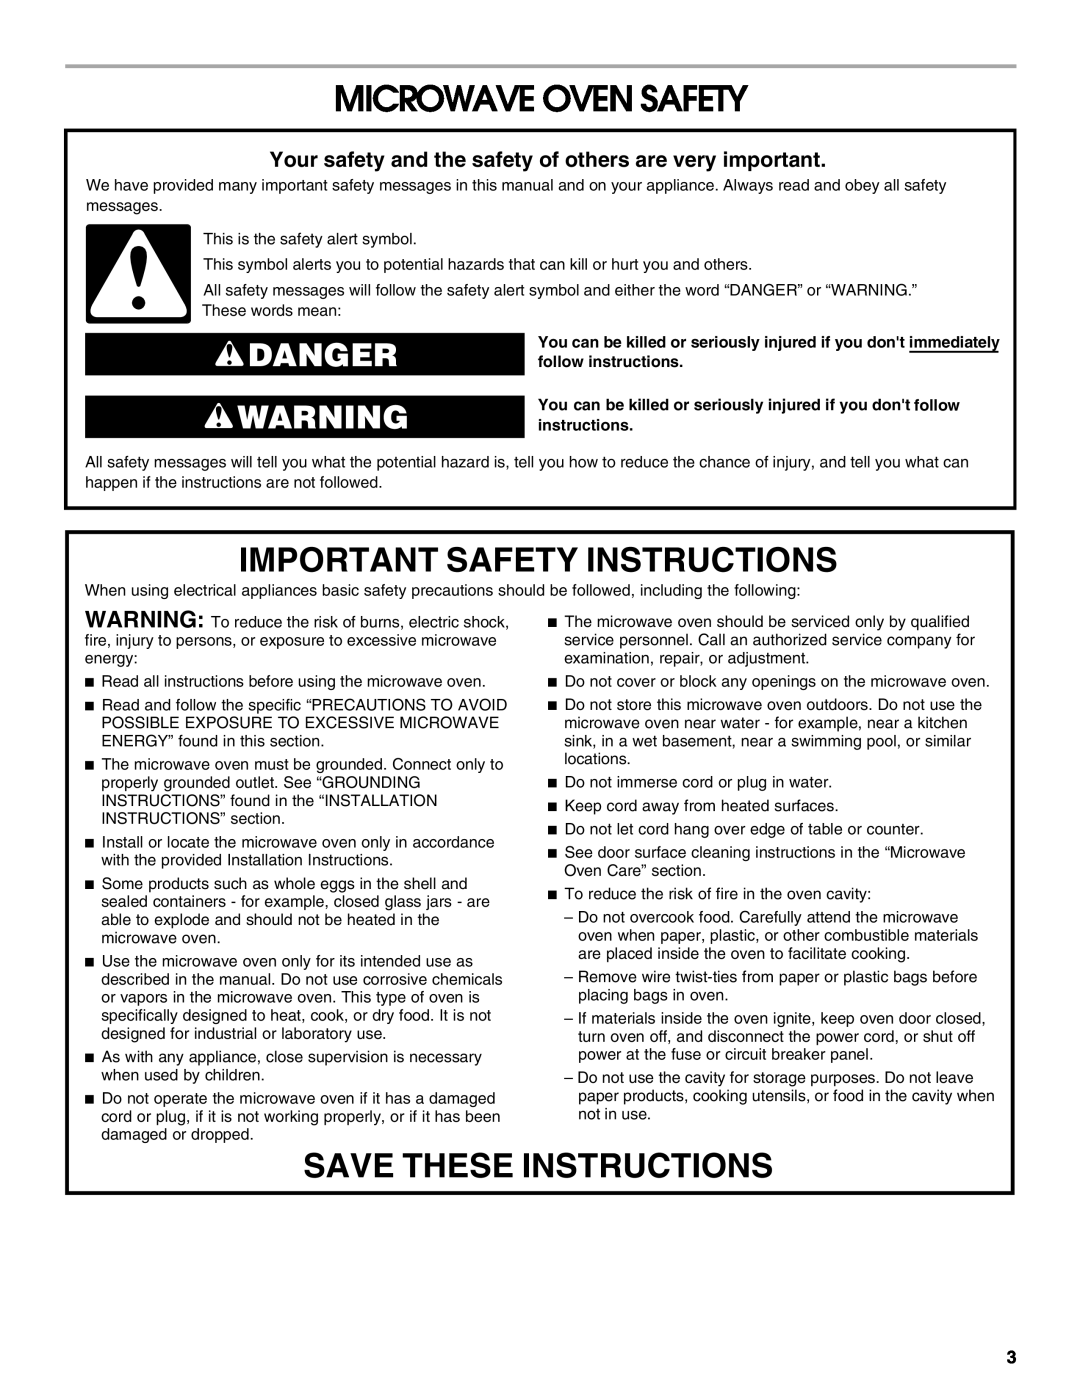 Whirlpool UMC5165 manual Microwave Oven Safety, Important Safety Instructions, Save These Instructions, Danger 